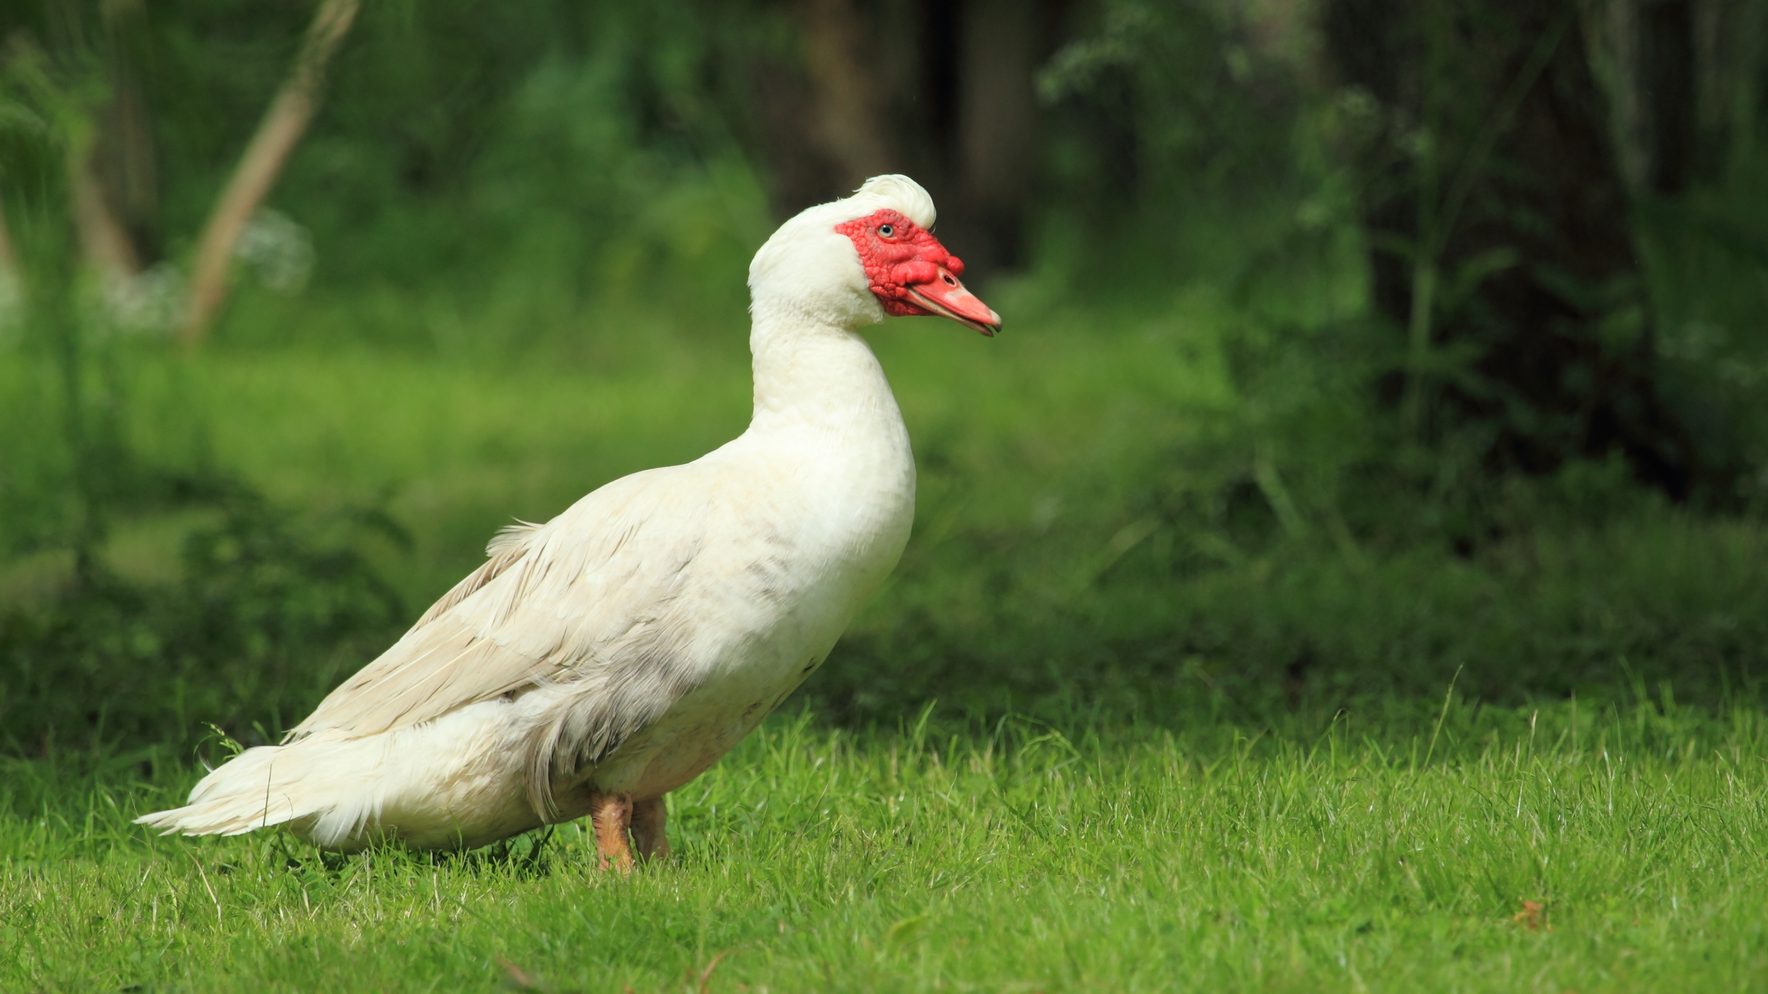 The domestic muscovy duck standing in the grass.